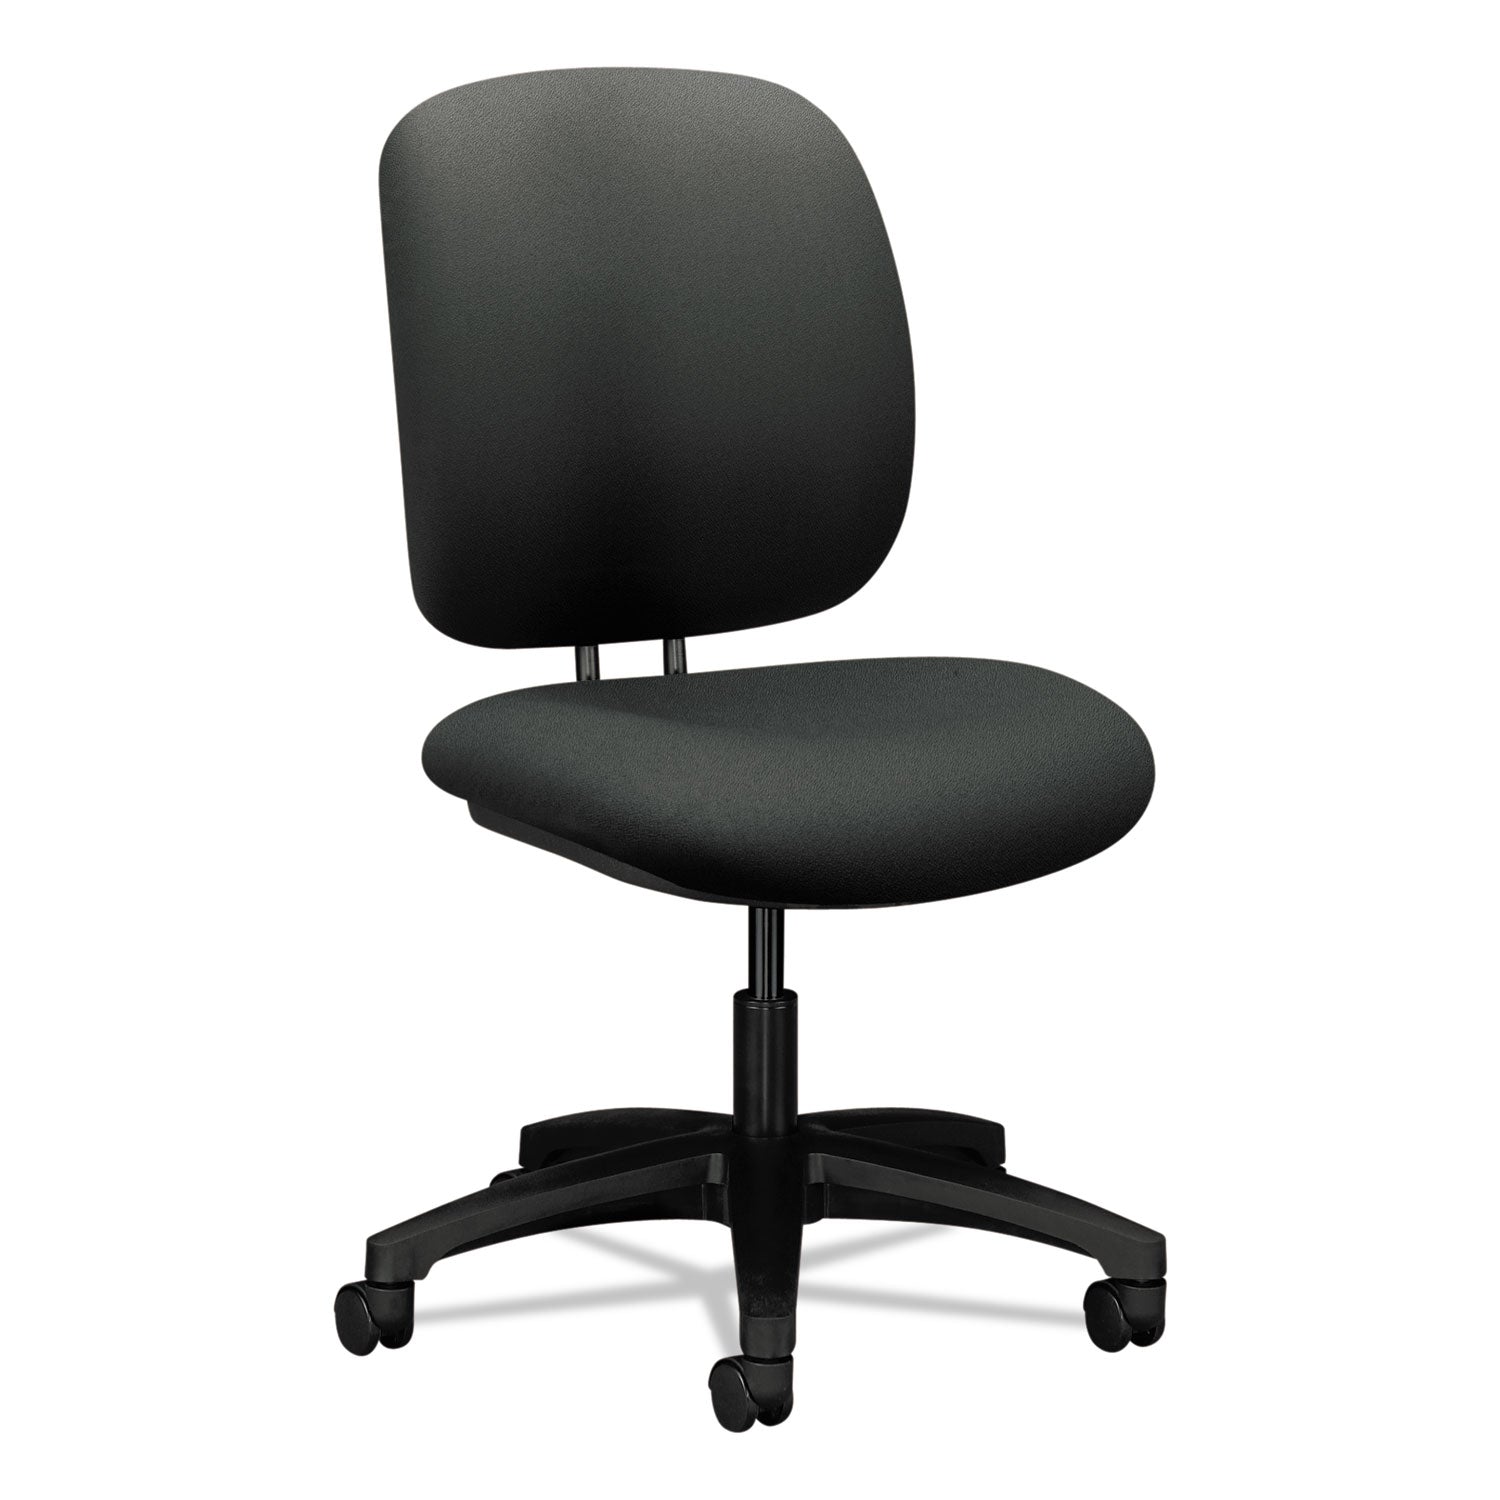 comfortask-task-swivel-chair-supports-up-to-300-lb-15-to-20-seat-height-iron-ore-seat-back-black-base_hon5901cu19t - 1